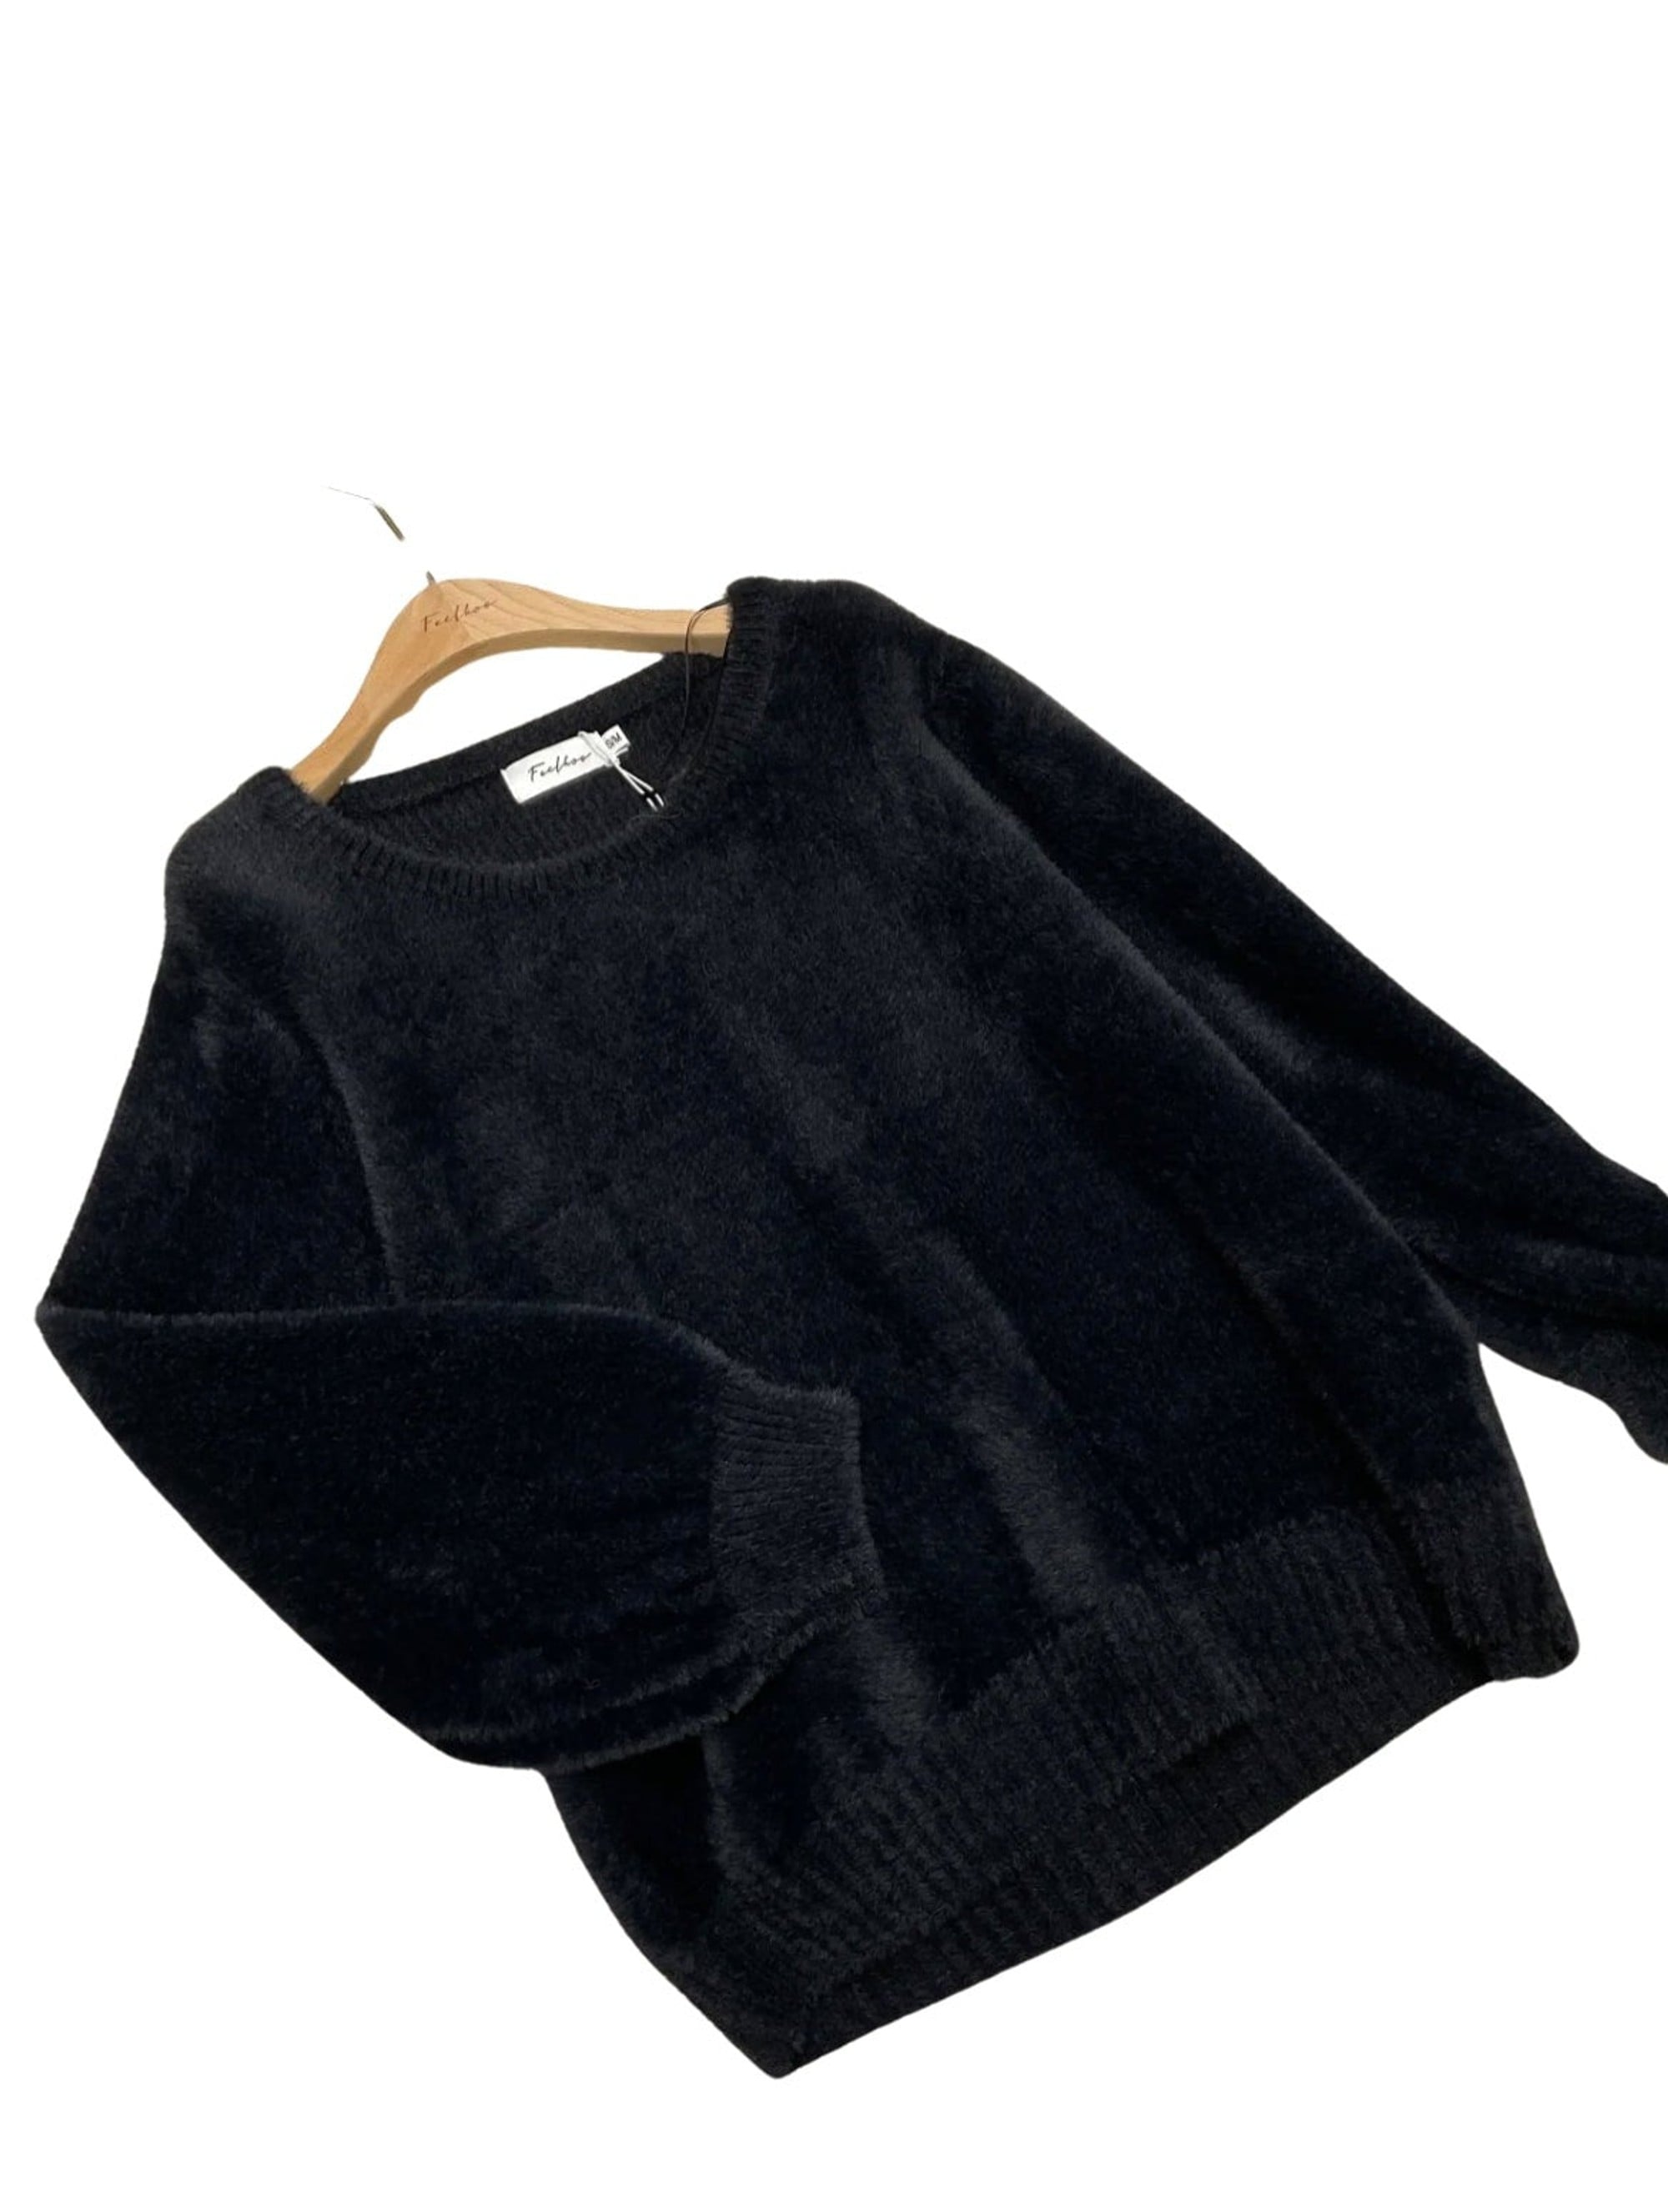 Clever Alice Fuzzy Bubble Sleeve Sweater in Four Colors - clever alice